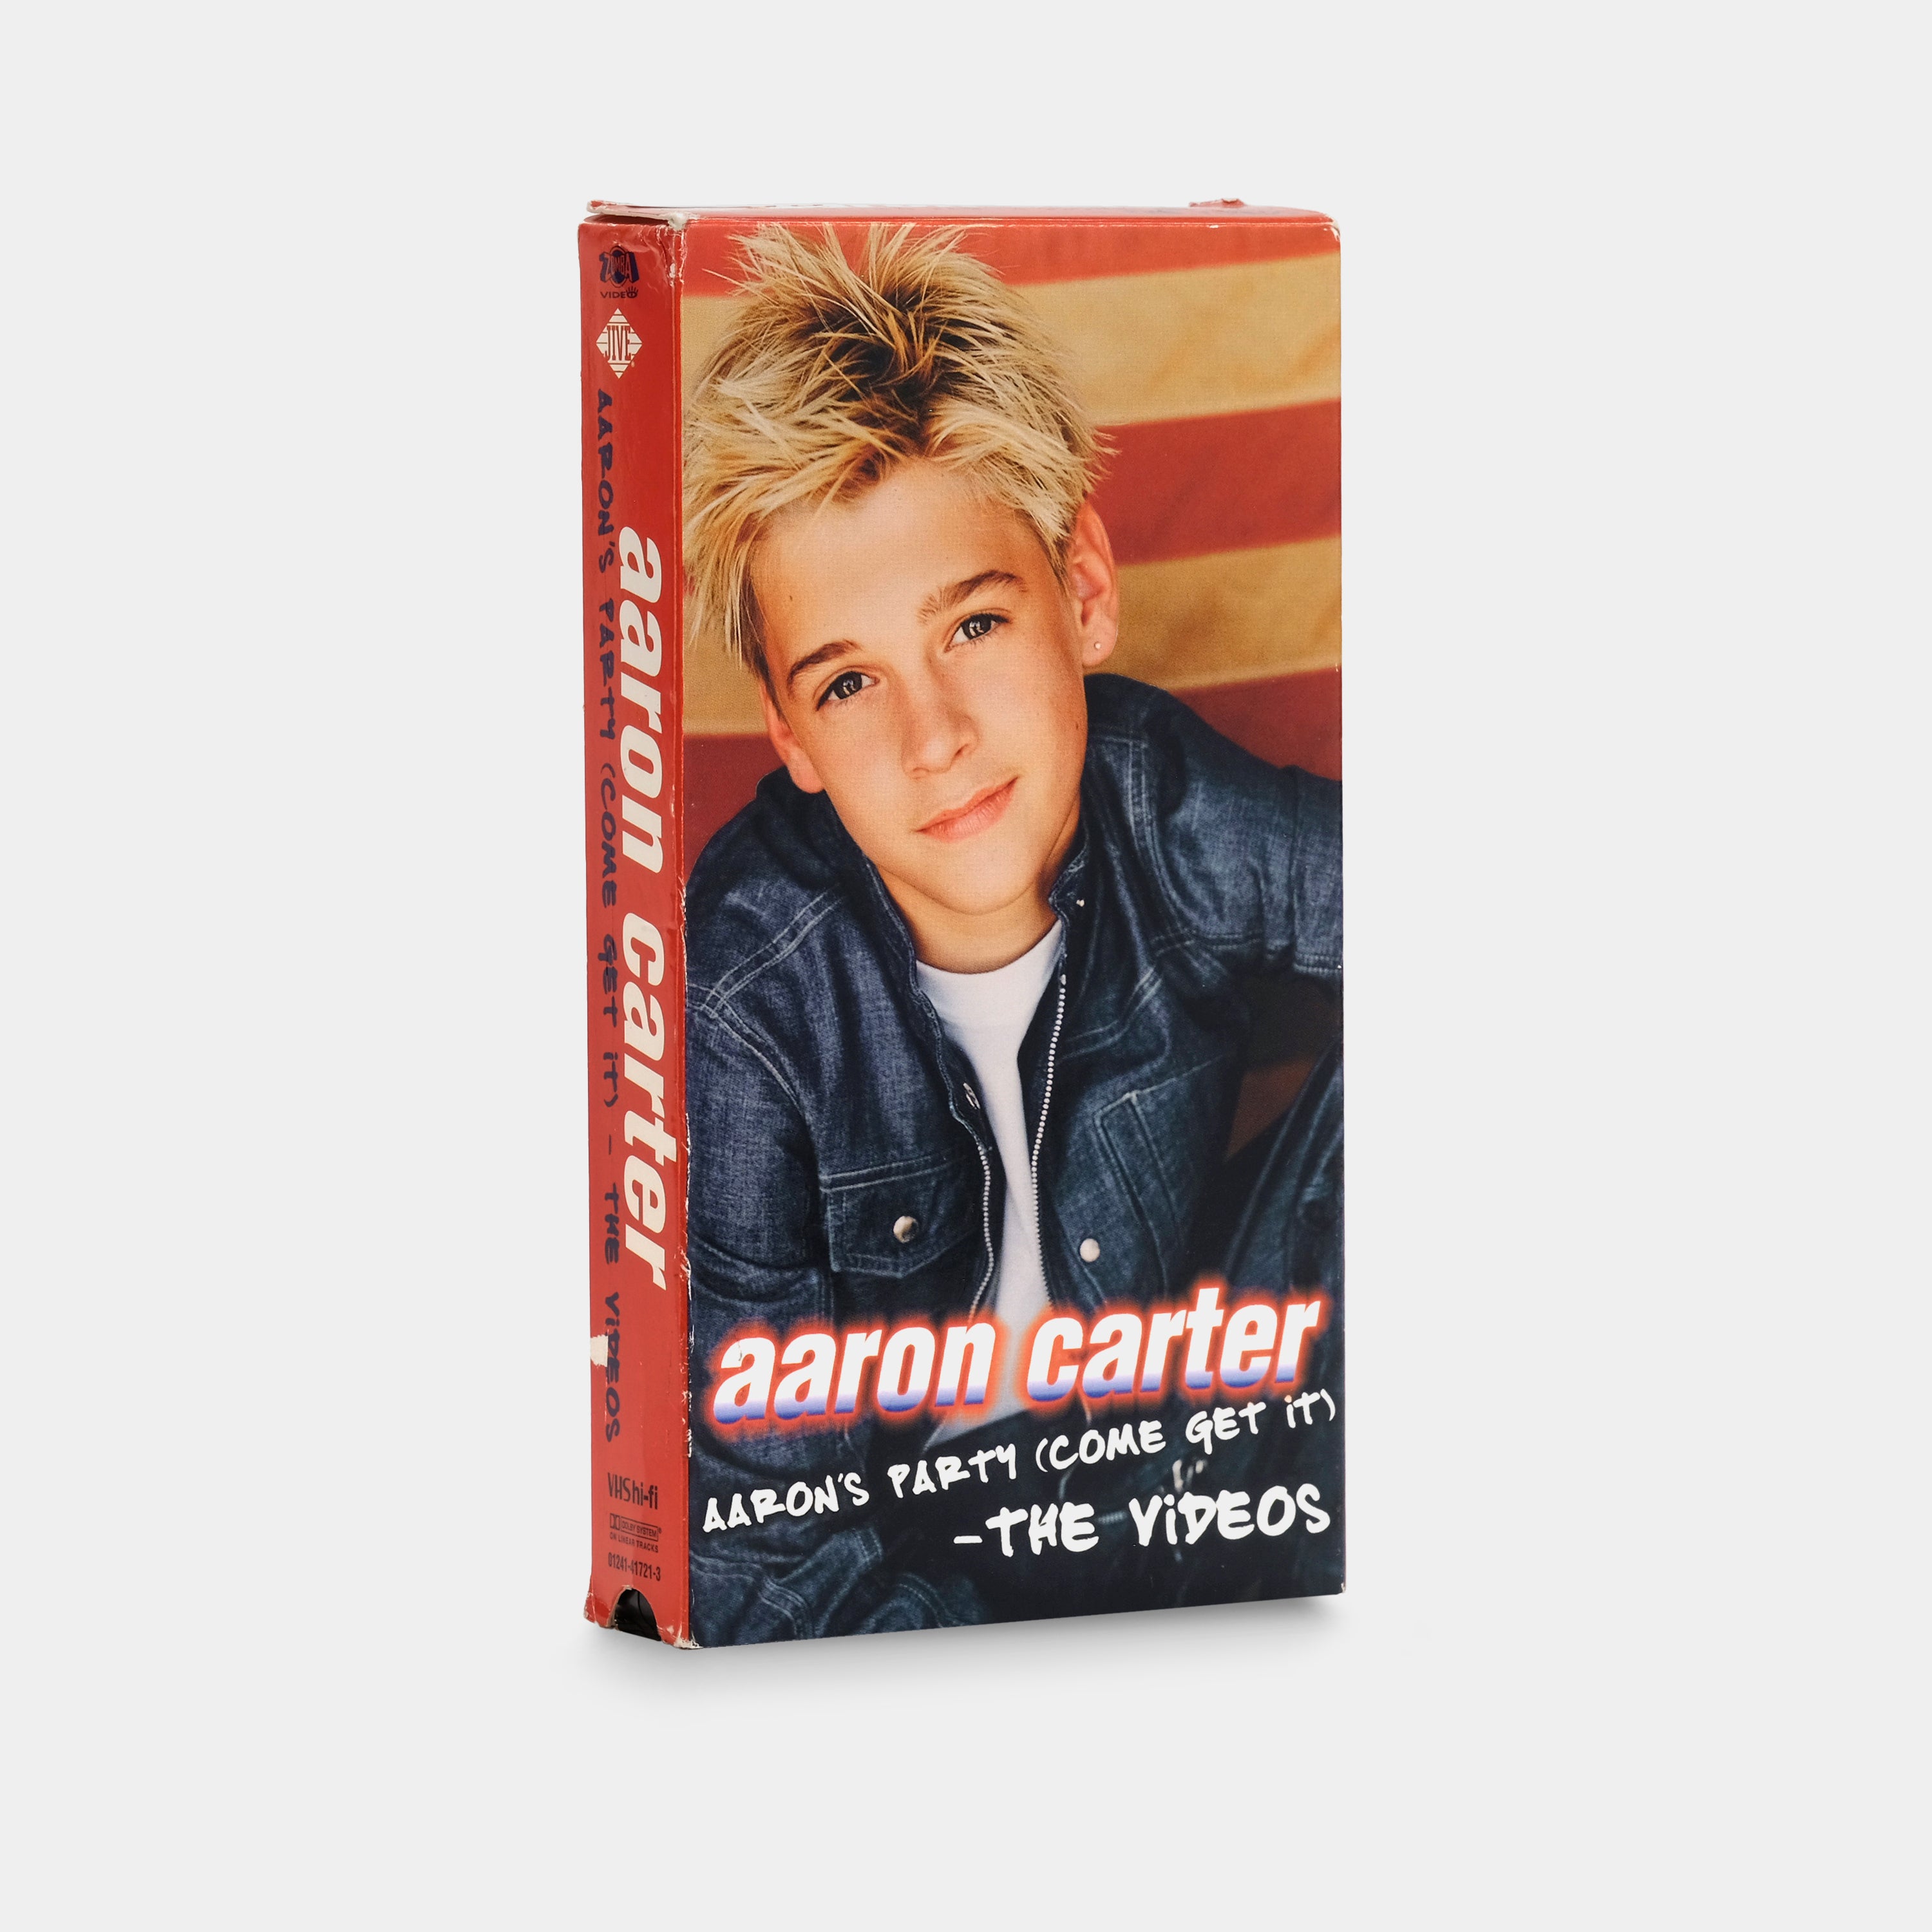 Aaron Carter: Aaron's Party (Come Get It) VHS Tape